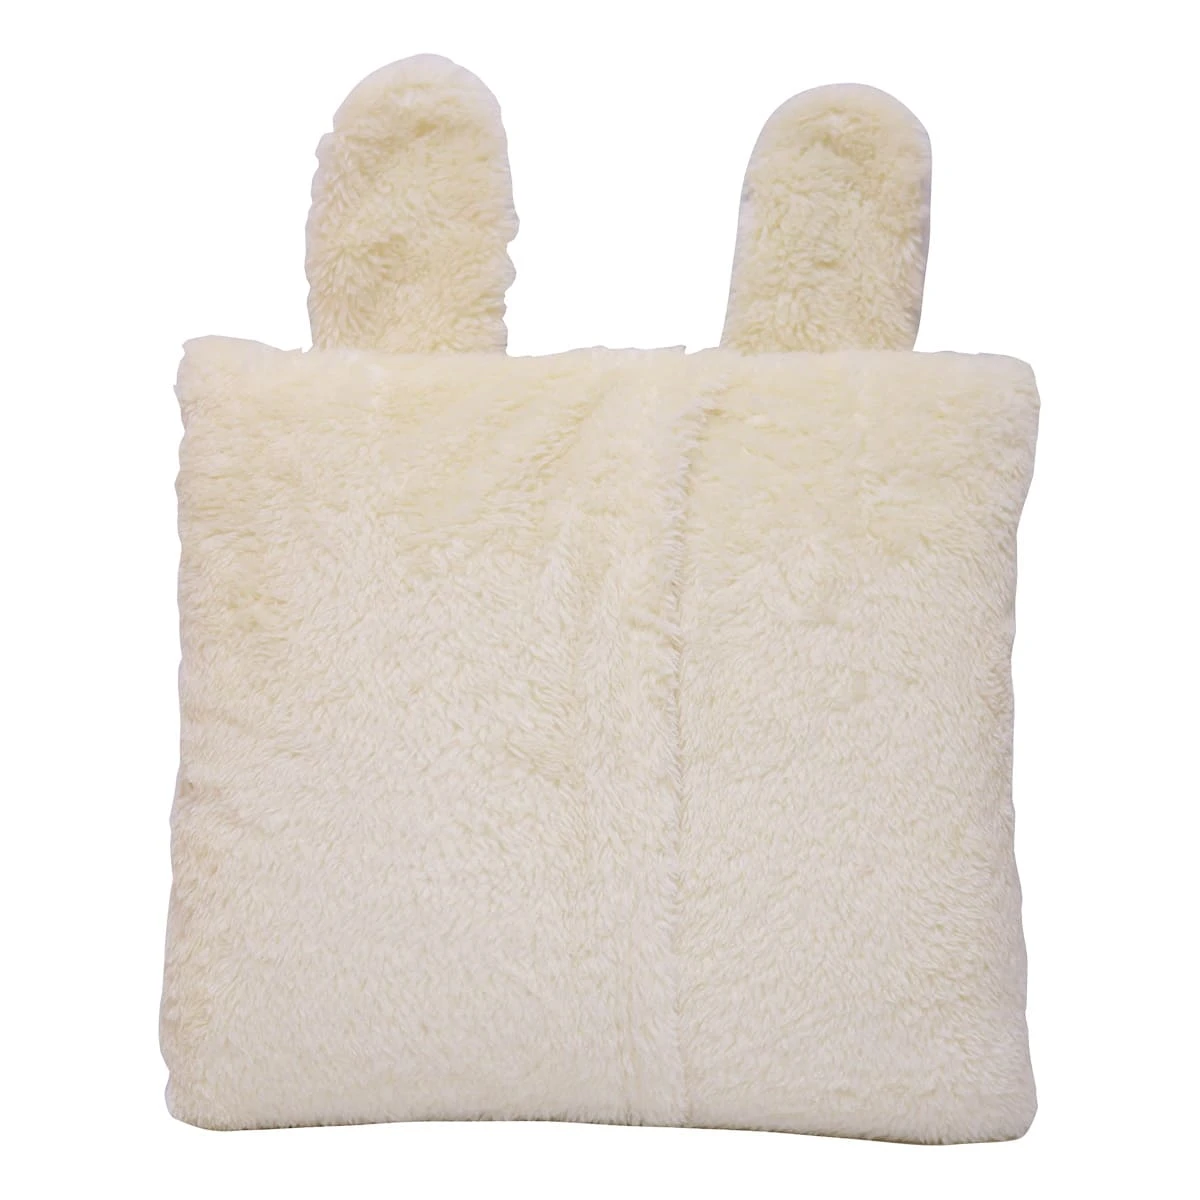 Ronnie 3D Embroidery Recycled Plush Pillow Blanket (Cream)